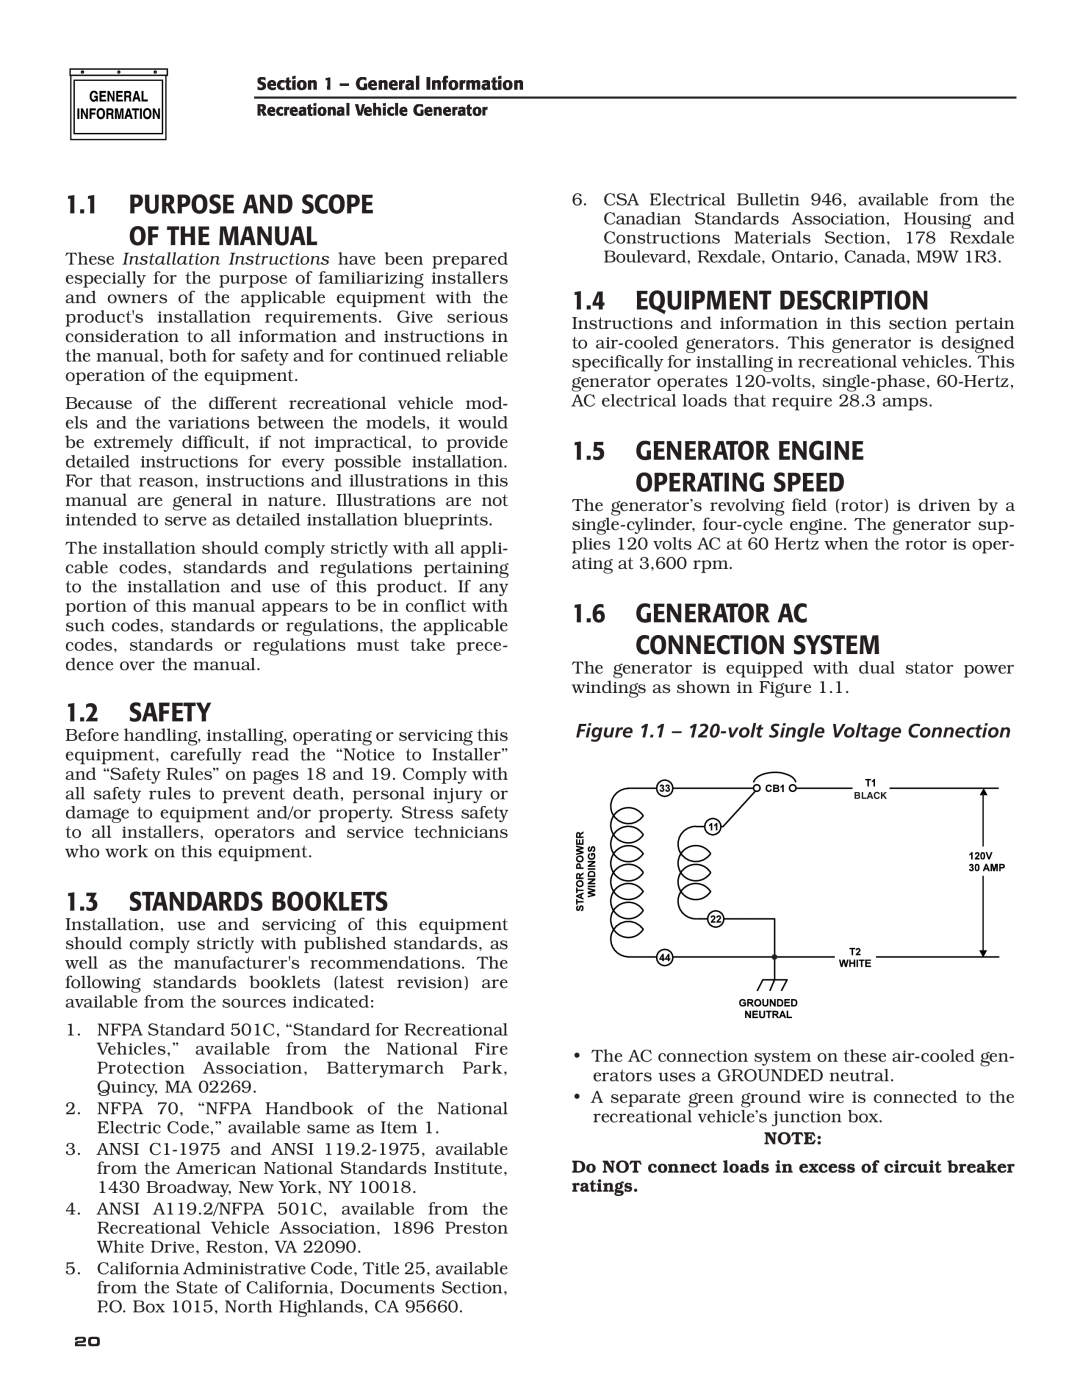 Generac Power Systems 004701-0 owner manual 1.1PURPOSE AND SCOPE OF THE MANUAL, 1.4EQUIPMENT DESCRIPTION, 1.2SAFETY 